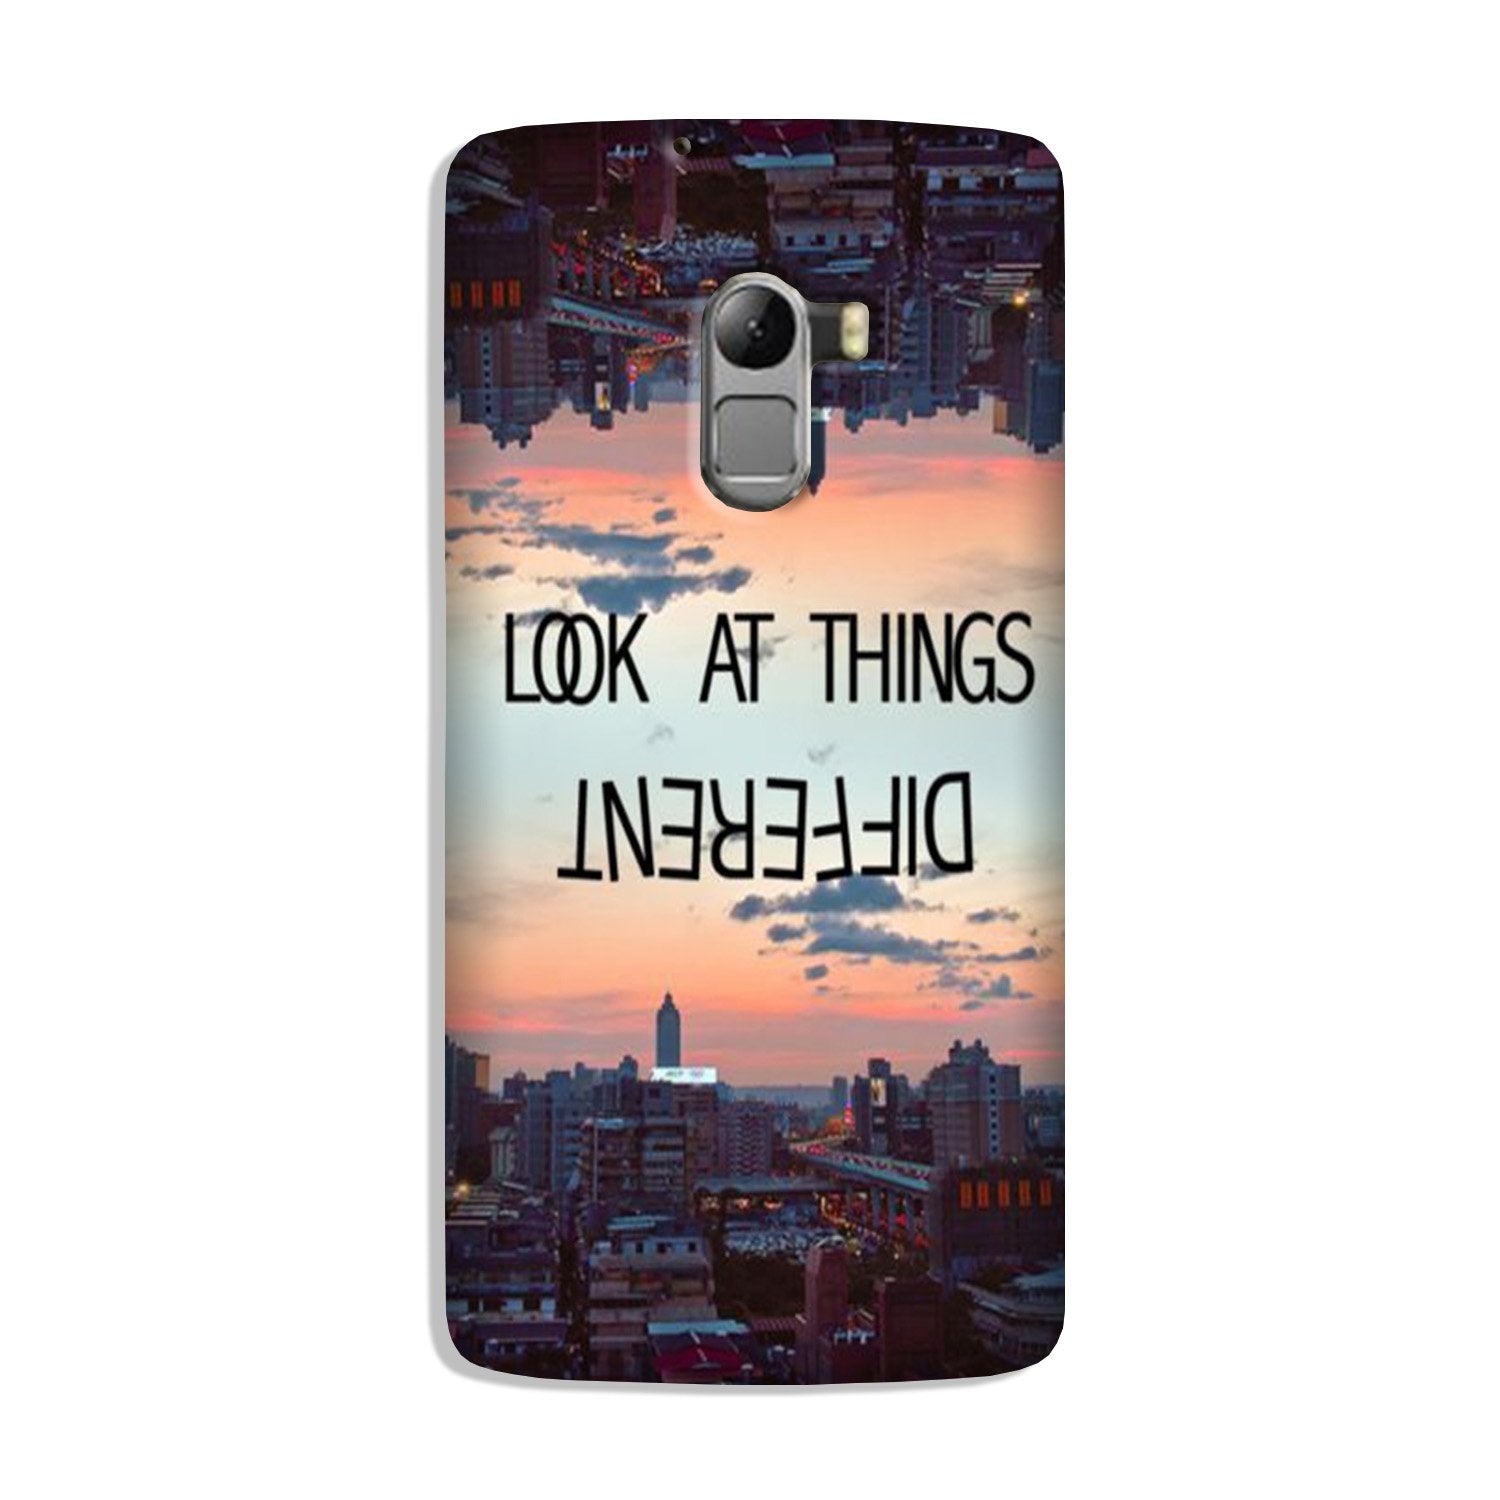 Look at things different Case for Lenovo K4 Note